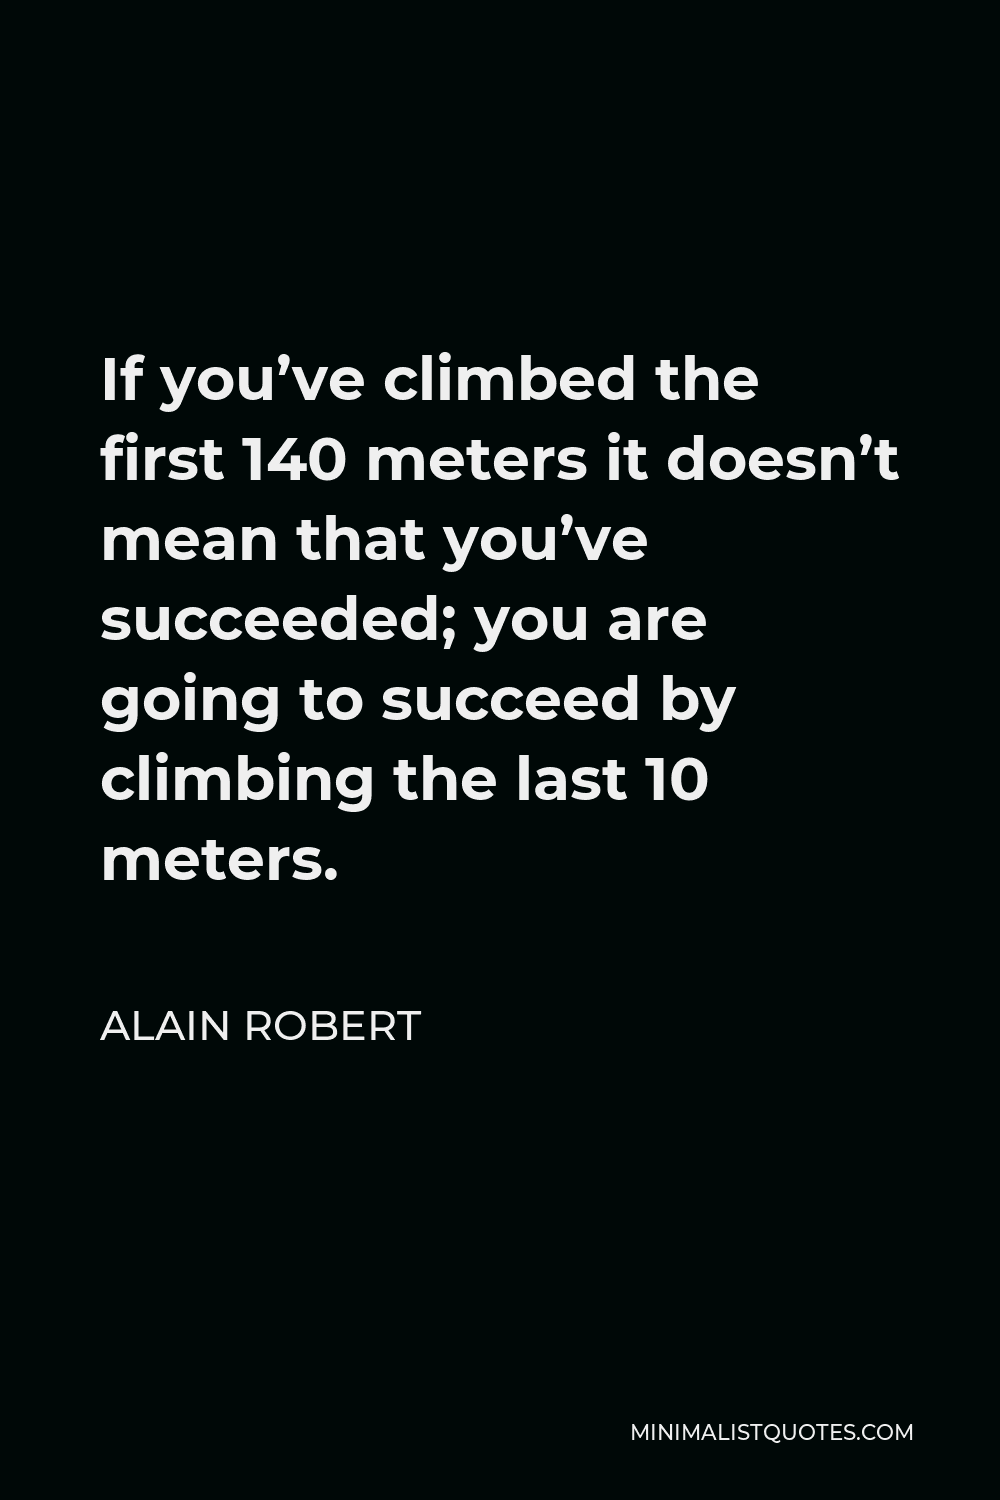 Alain Robert Quote - If you’ve climbed the first 140 meters it doesn’t mean that you’ve succeeded; you are going to succeed by climbing the last 10 meters.